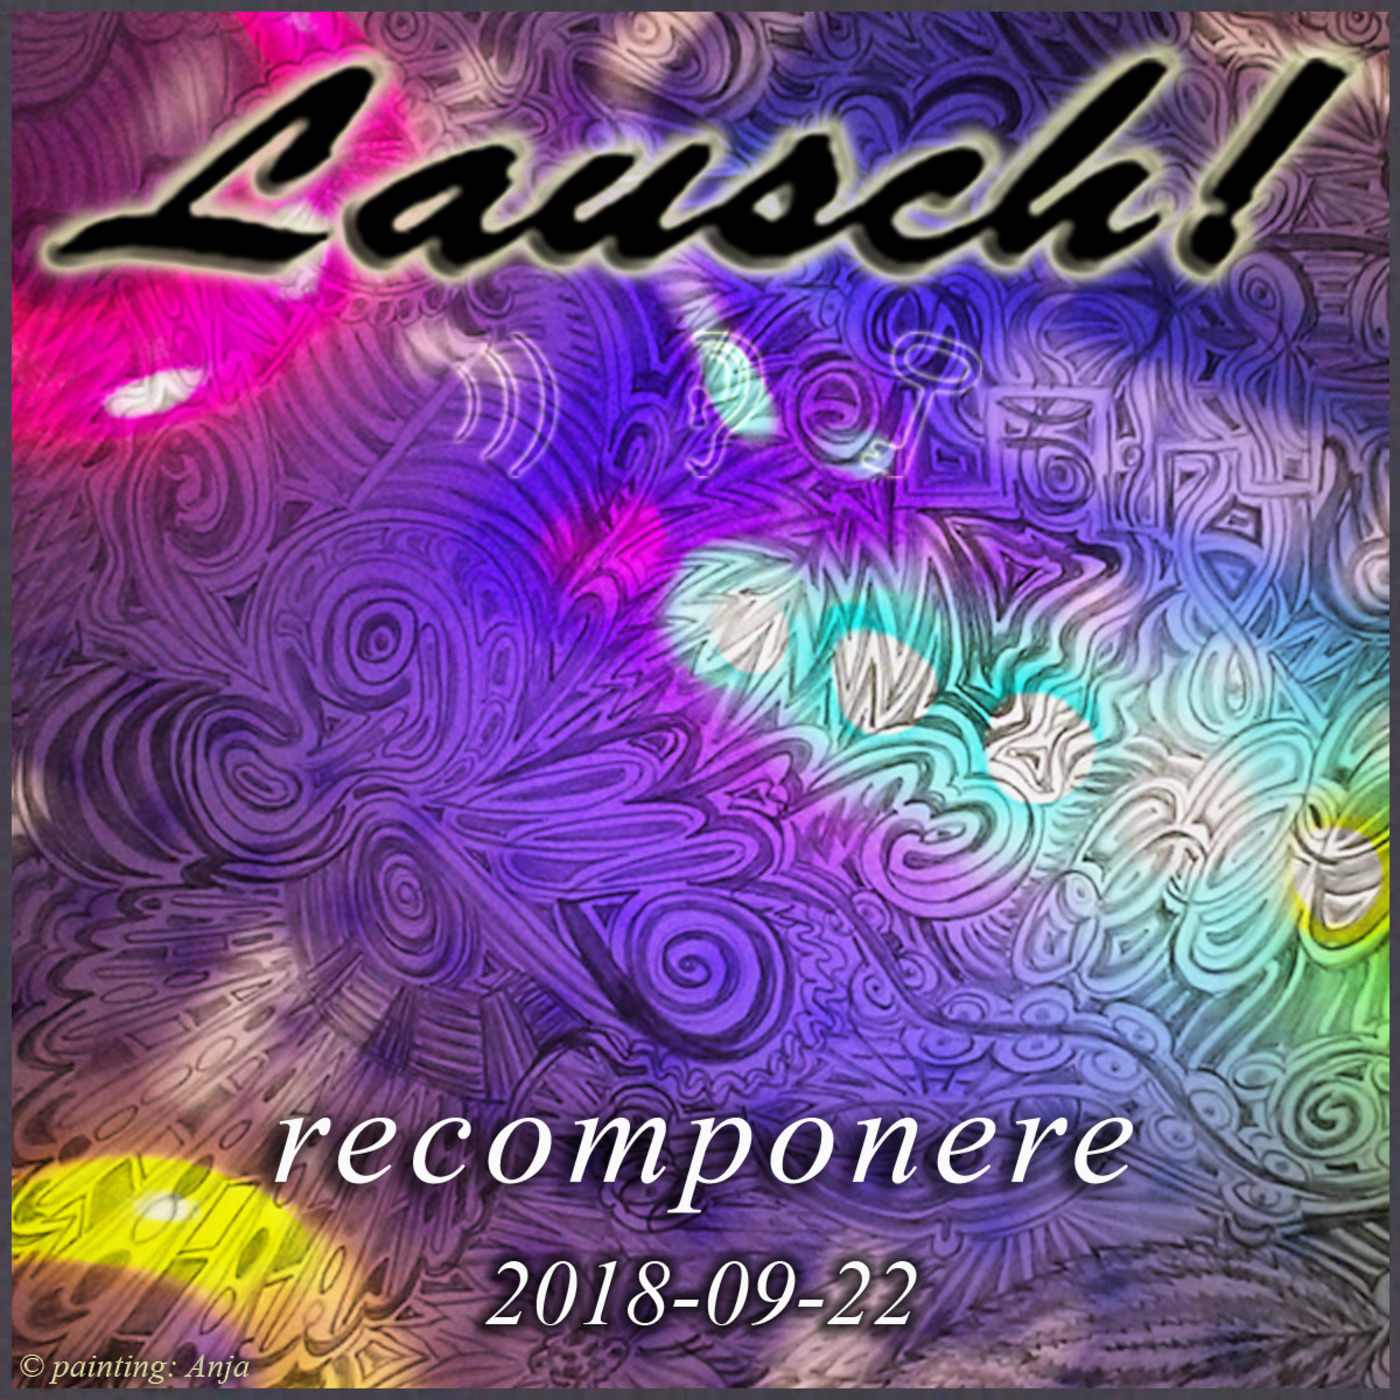 Lausch! - recomponere (2018-09-22)